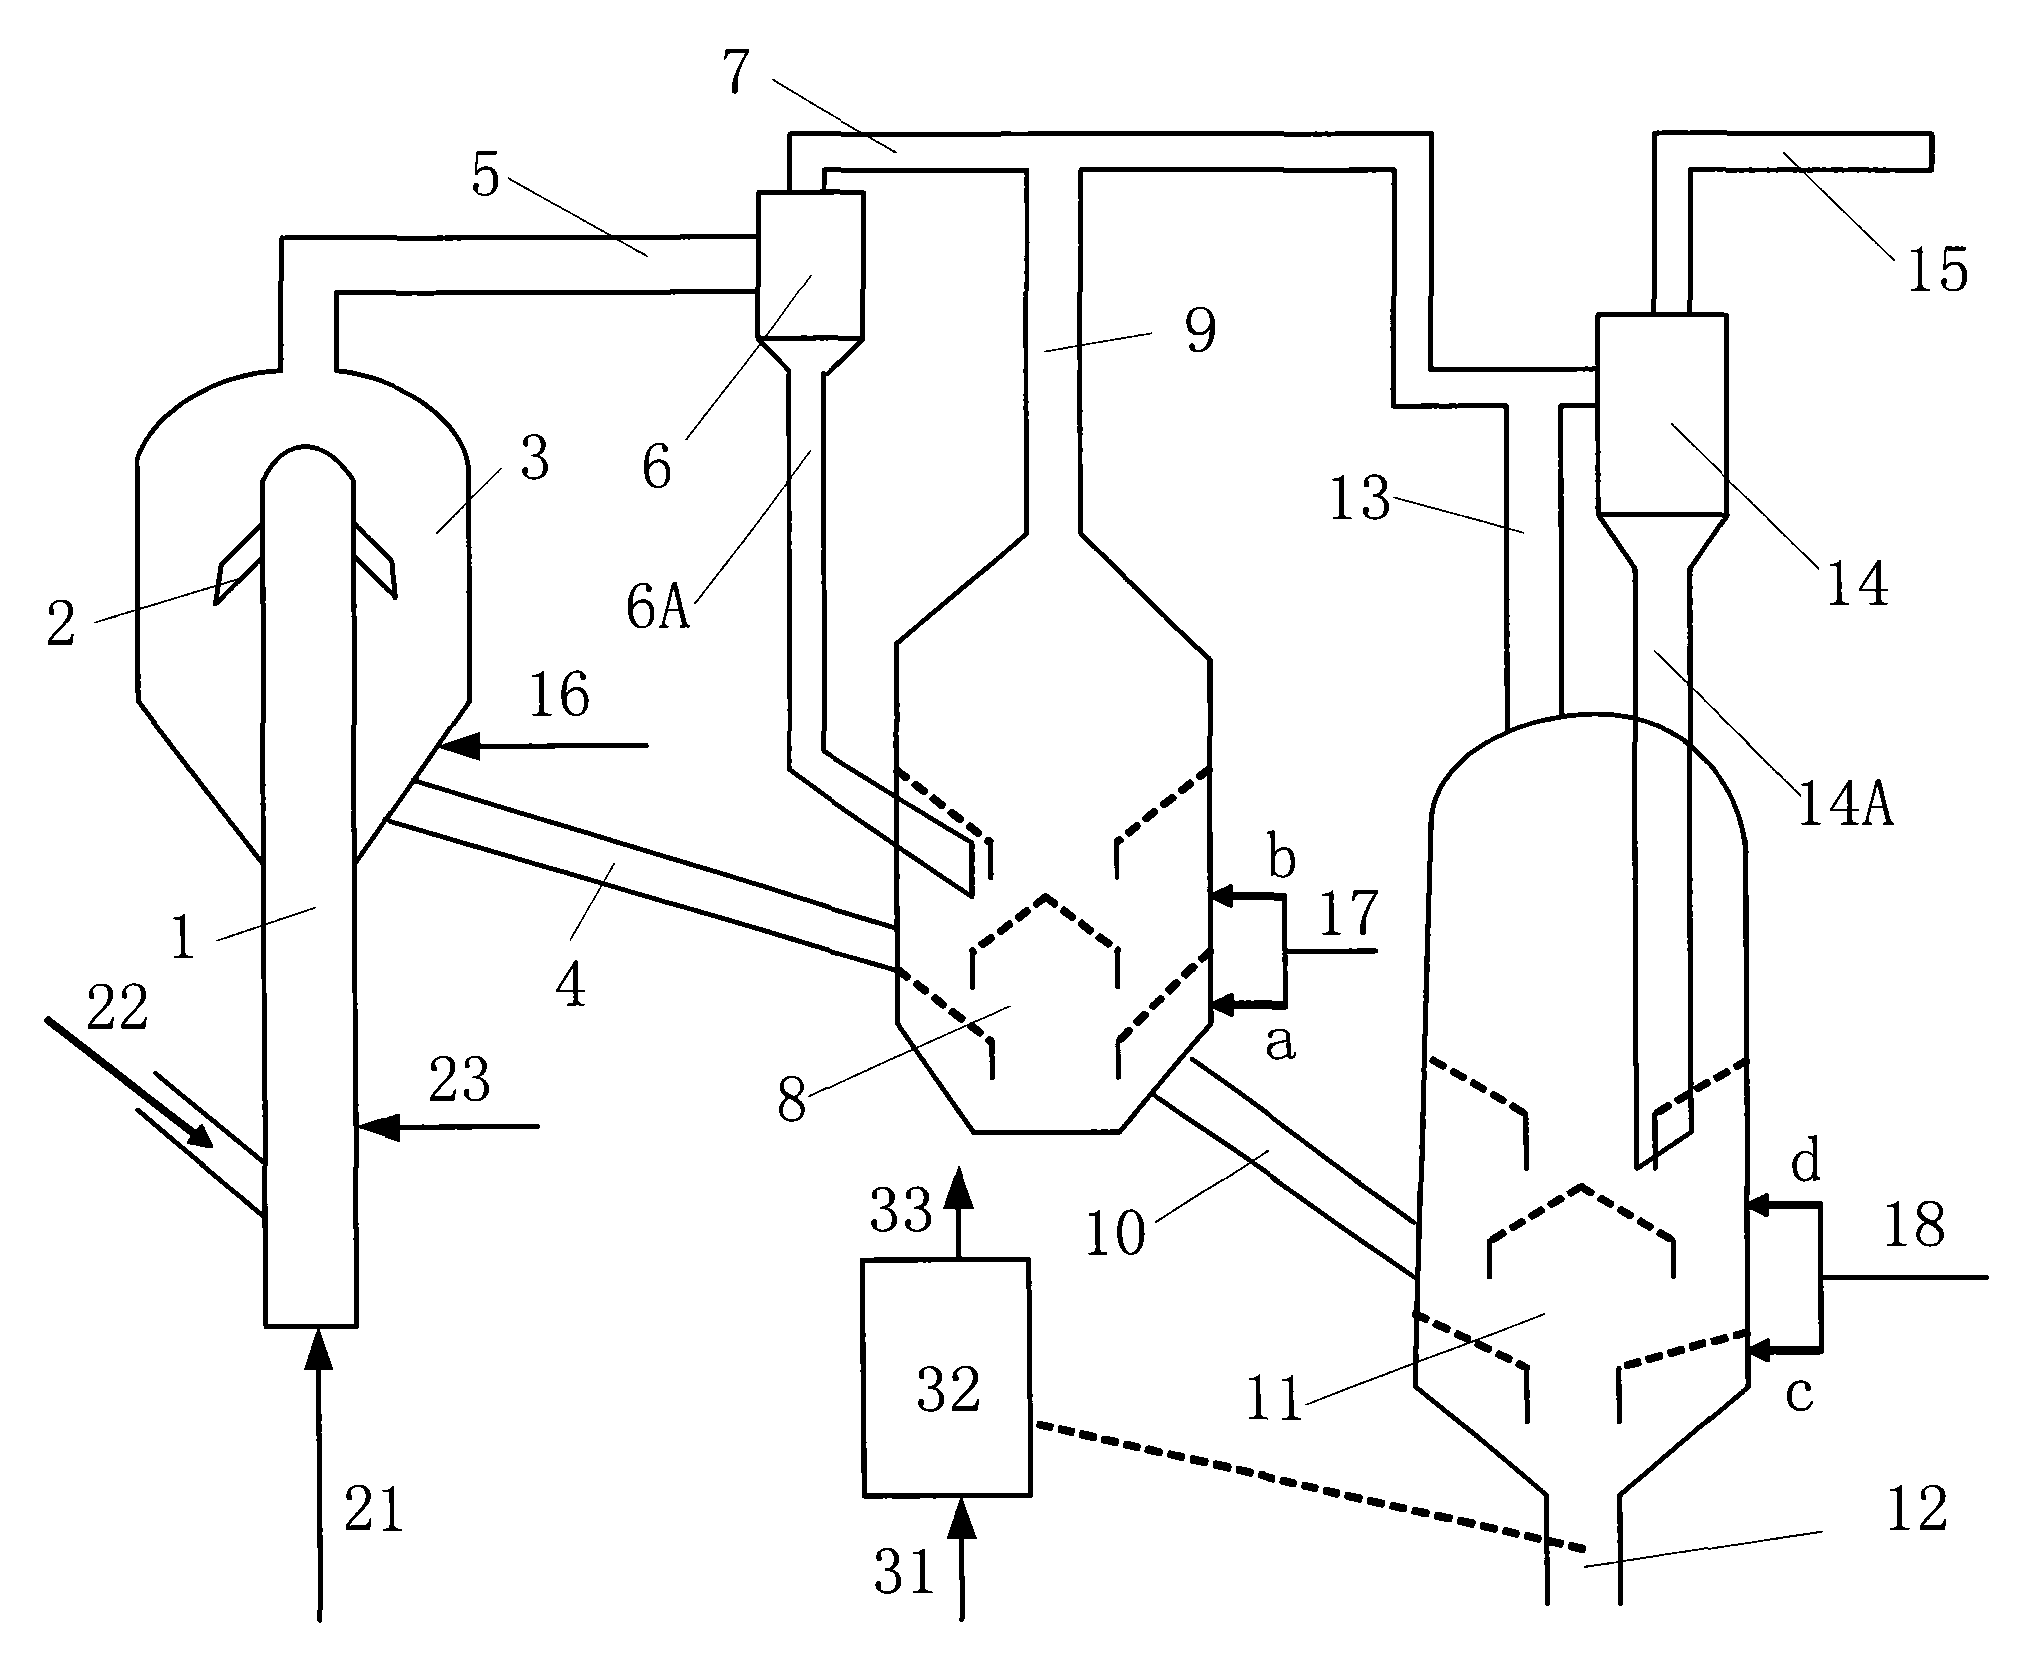 Fluid catalytic cracking oil and gas separation and steam stripping equipment and method